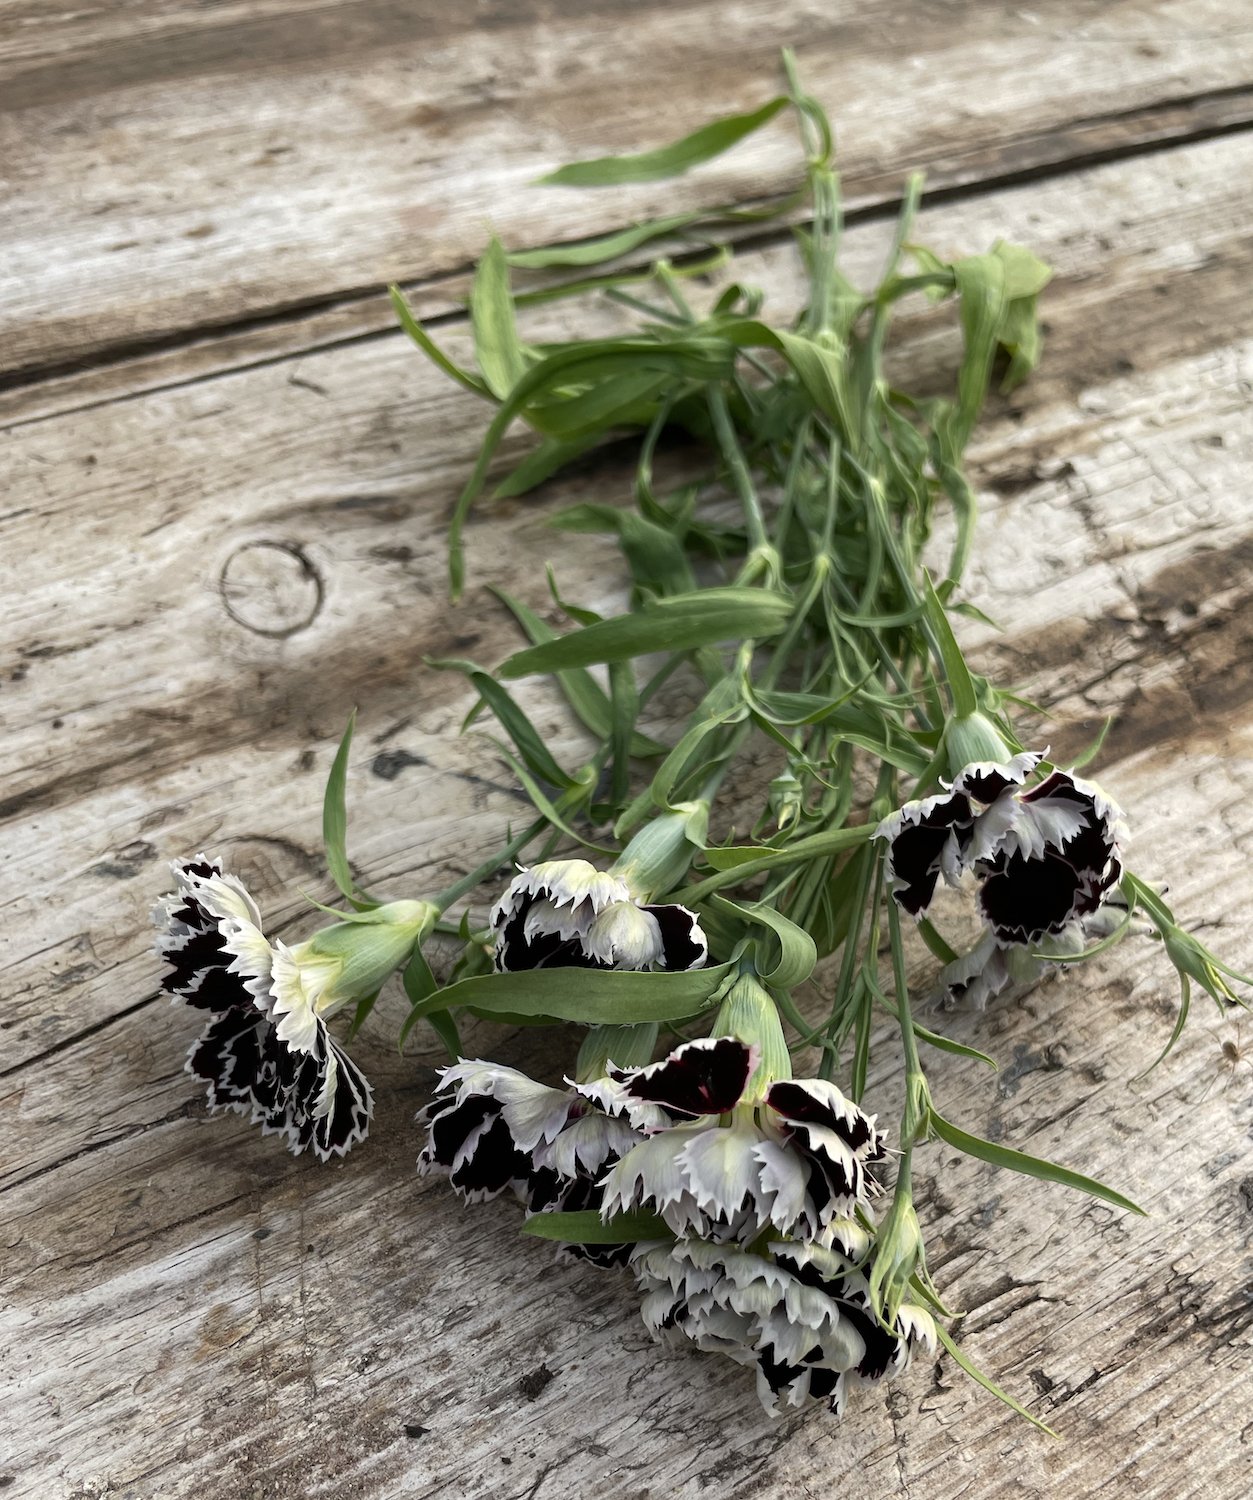 black and white sweet william on wooden table in garden 